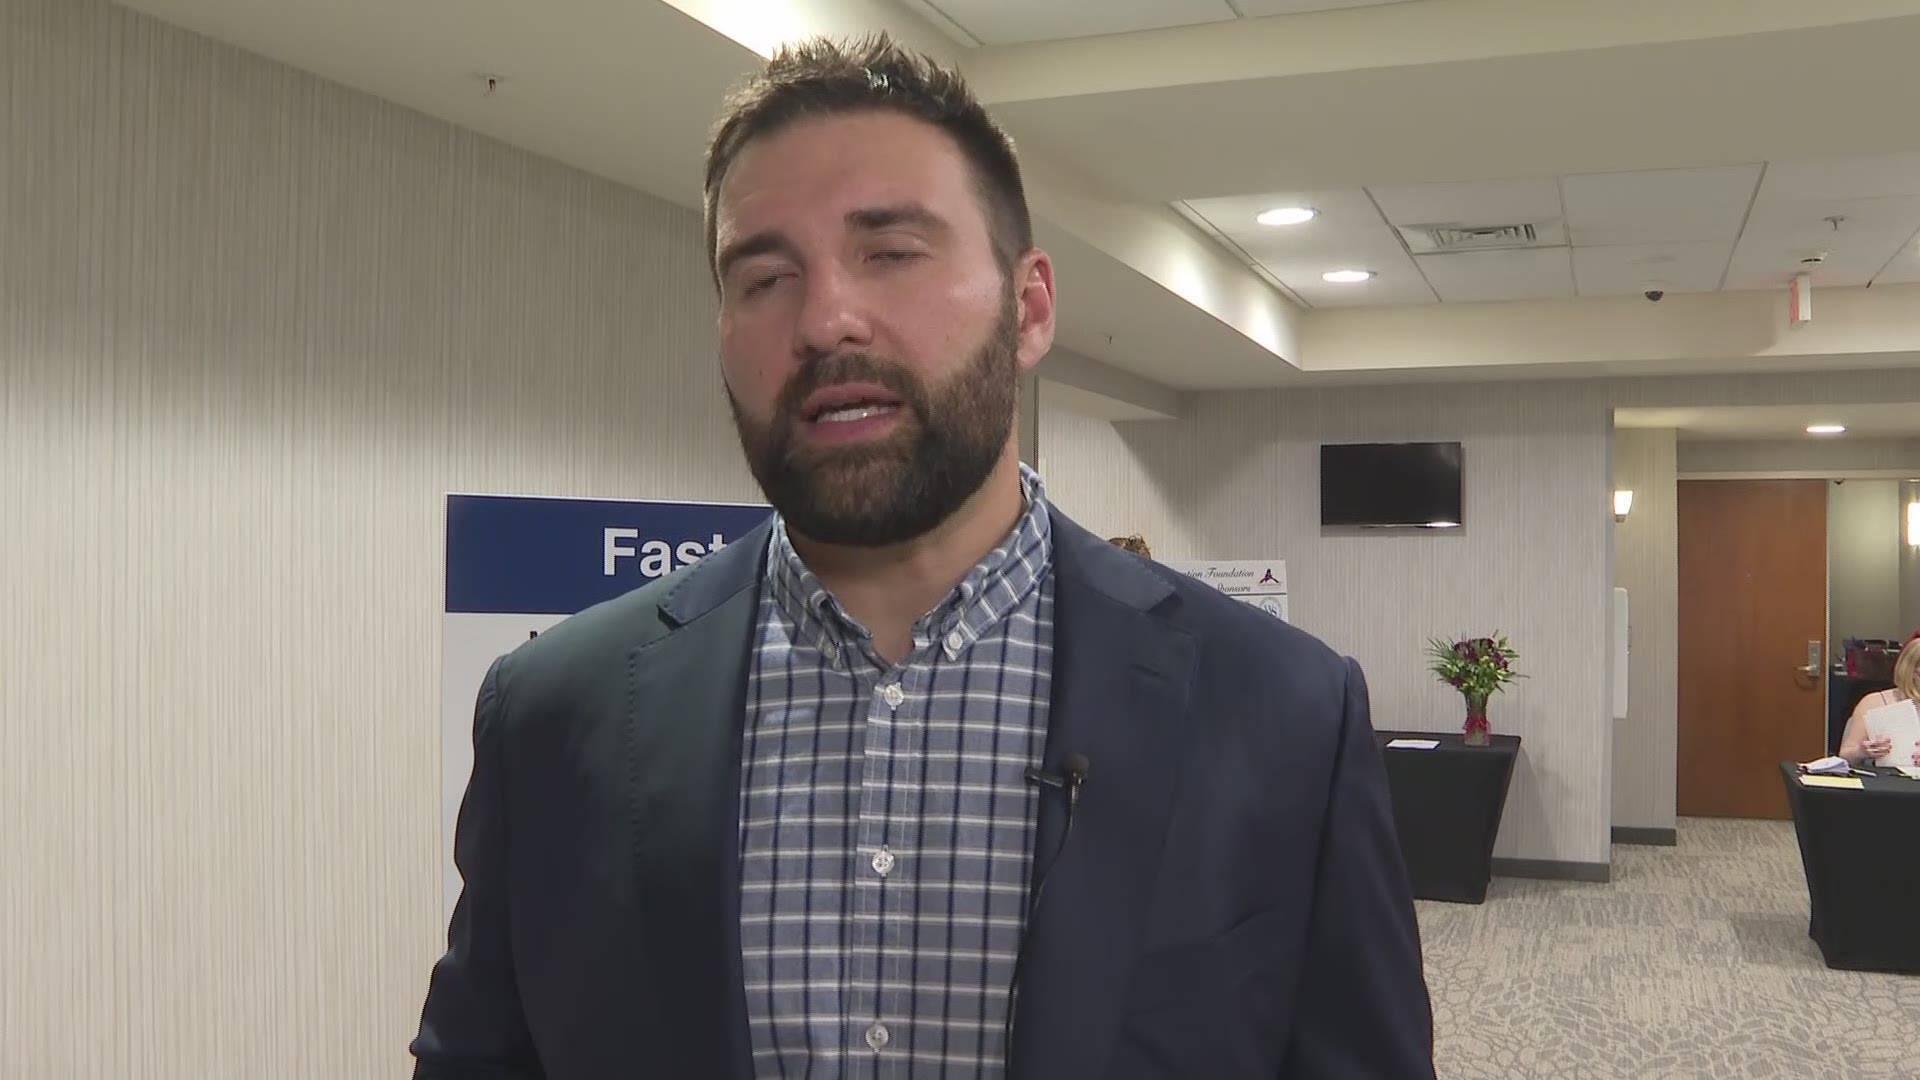 Former New England Patriots player Rob Ninkovich paid a visit to a couple of stops in Maine Friday.